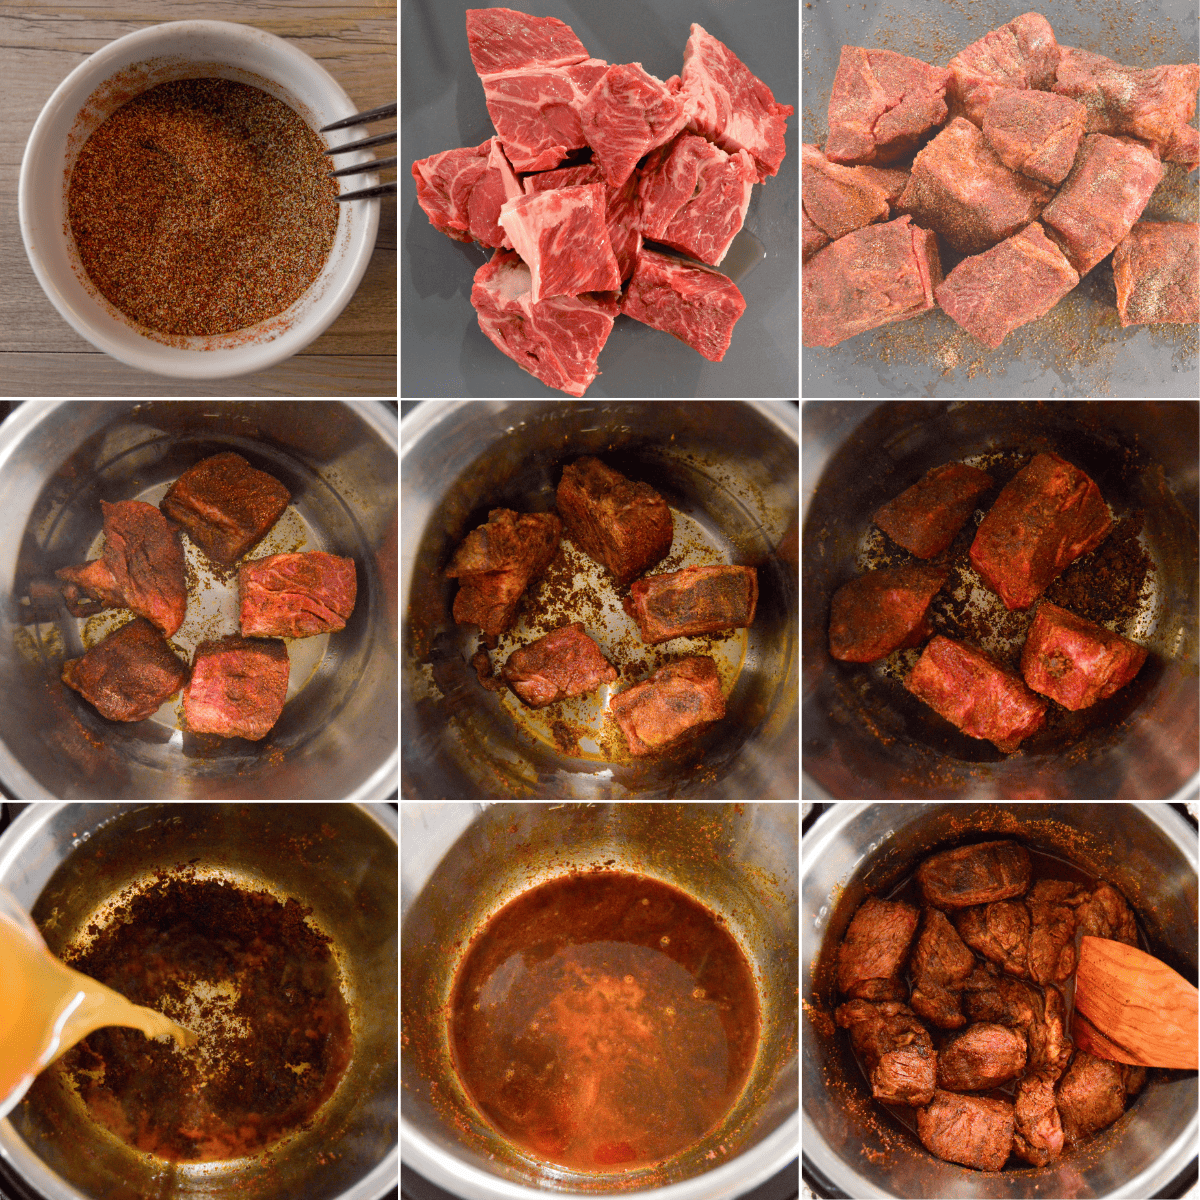 9 images shown in collage for Prepping Shredded Beef for Instant Pot before pressure cooking; from mixed spices to deglazing pot and returning before before sealing Instant Pot